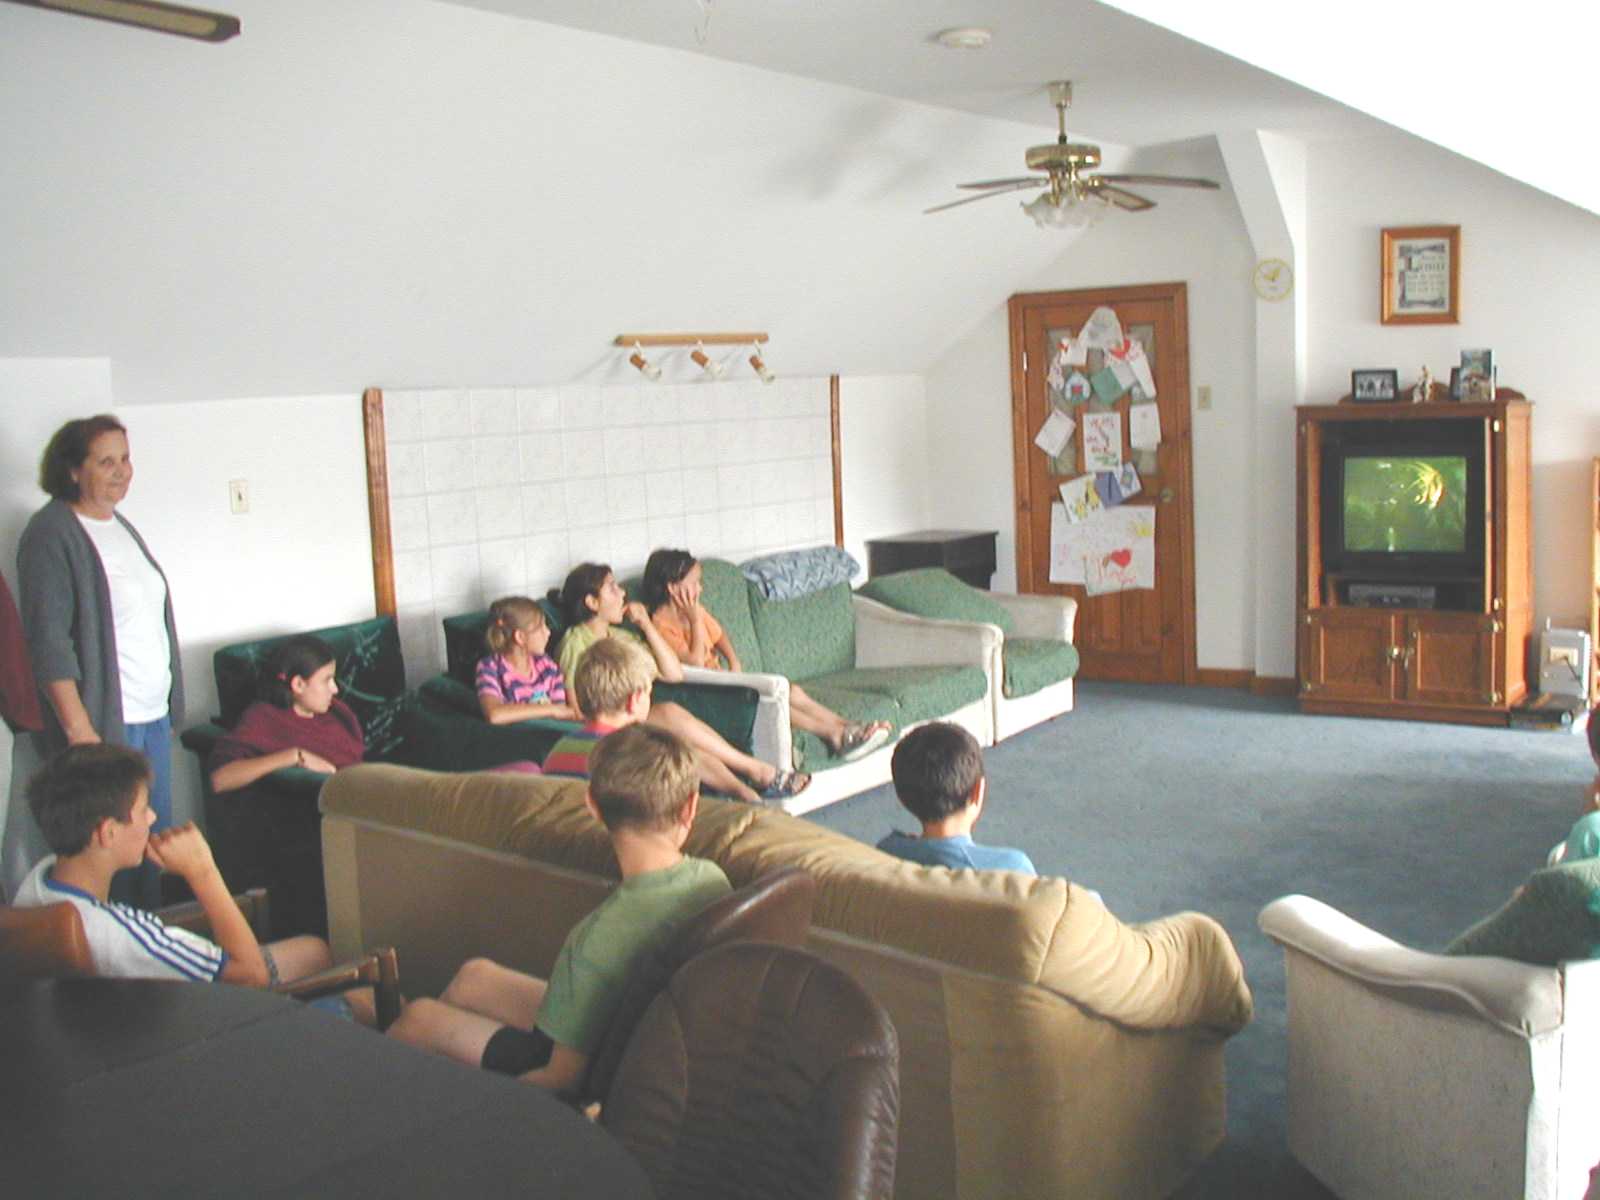 The children relax watching a video in the television room at Dornesti.